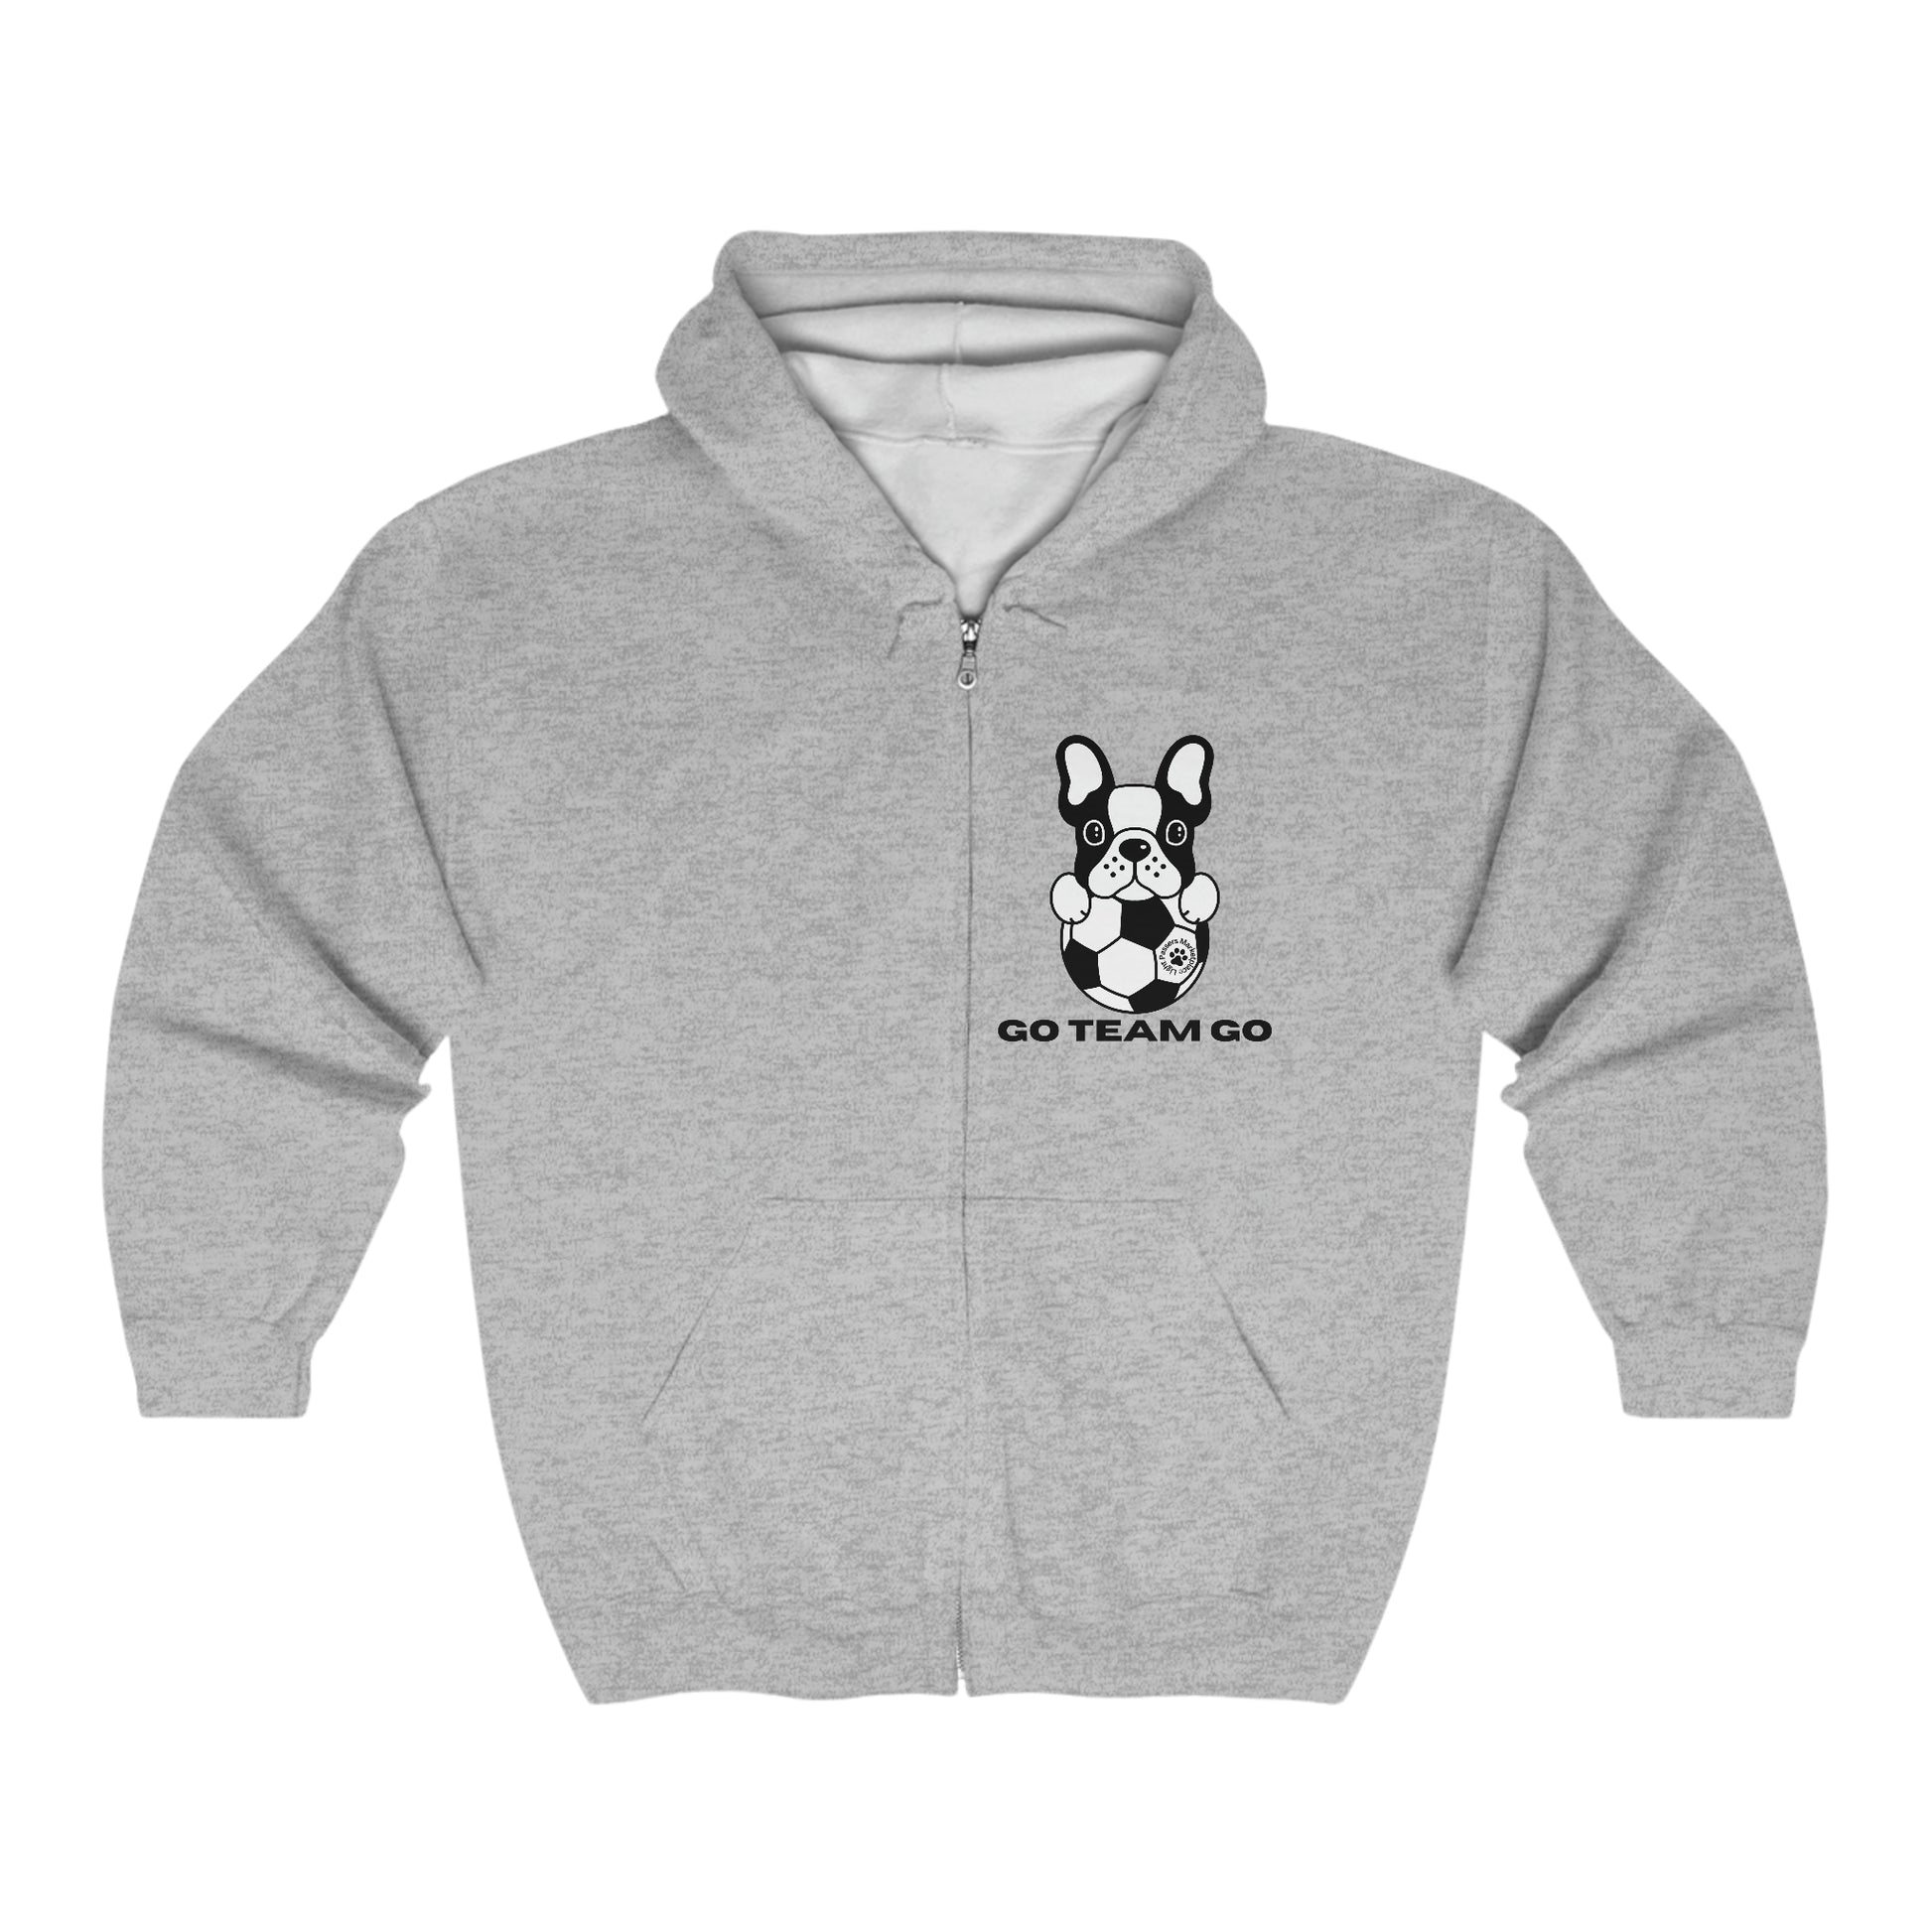 A grey full zip hooded sweatshirt featuring a dog with a football. Medium-heavy fabric, classic fit, 50% cotton, 50% polyester blend. Sewn-in label, soft fleece, reduced pilling.